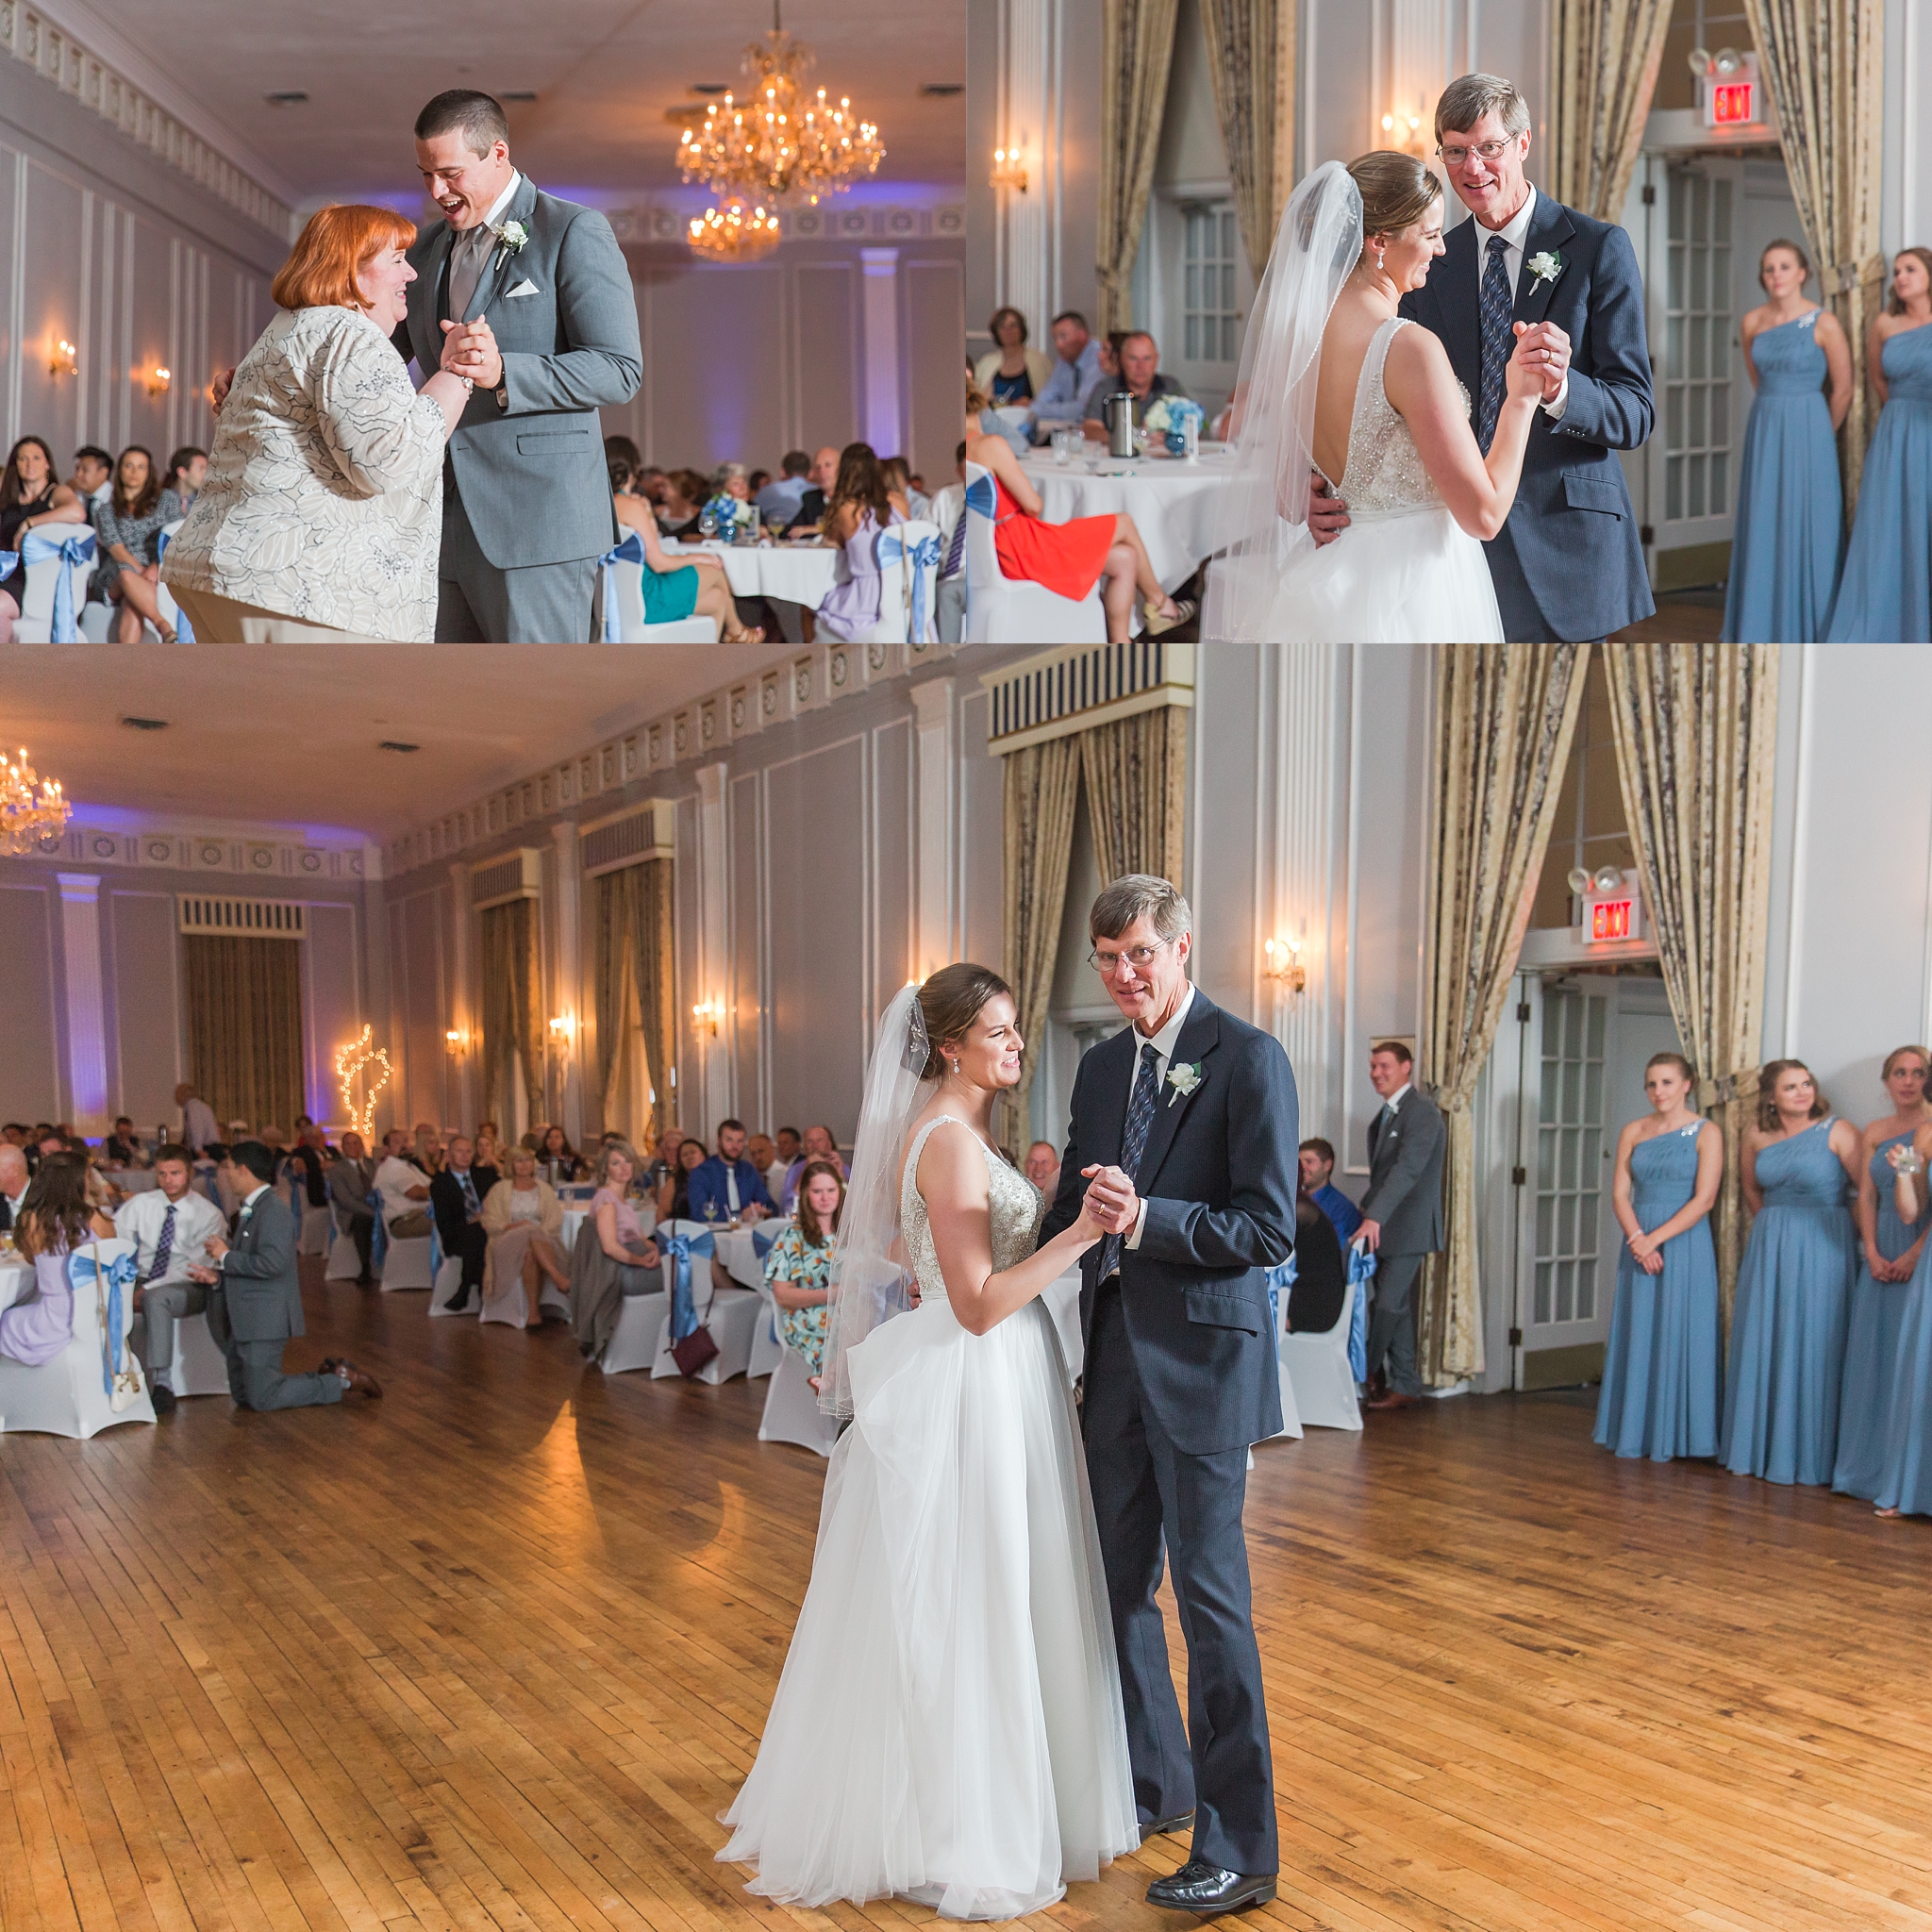 classic-intimate-fun-wedding-photos-at-the-meeting-house-grand-ballroom-in-plymouth-michigan-by-courtney-carolyn-photography_0091.jpg